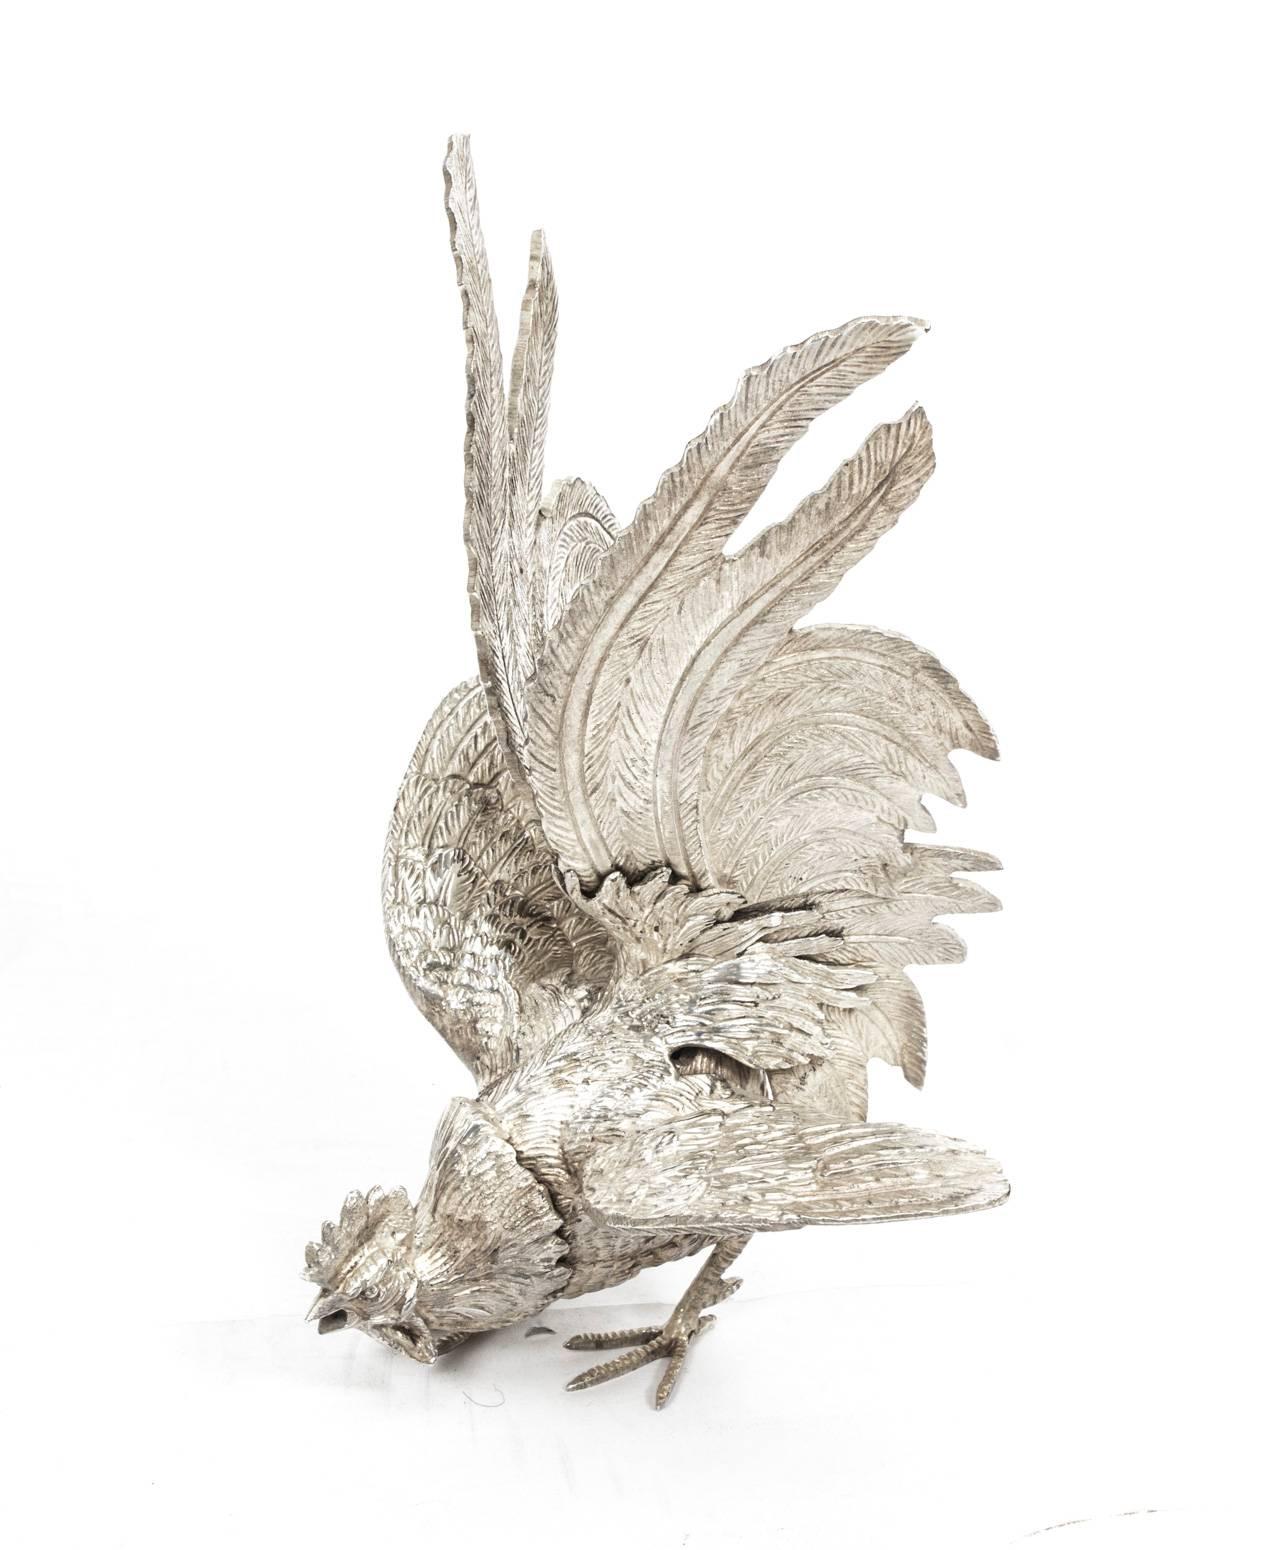 This is a very attractive antique pair of French silver plated fighting cockerels, circa 1880 in date.

These beautifully sculpted and hand-chased fine textured cockerels are in realistic aggressive and dynamic fighting poses with flowing plumage